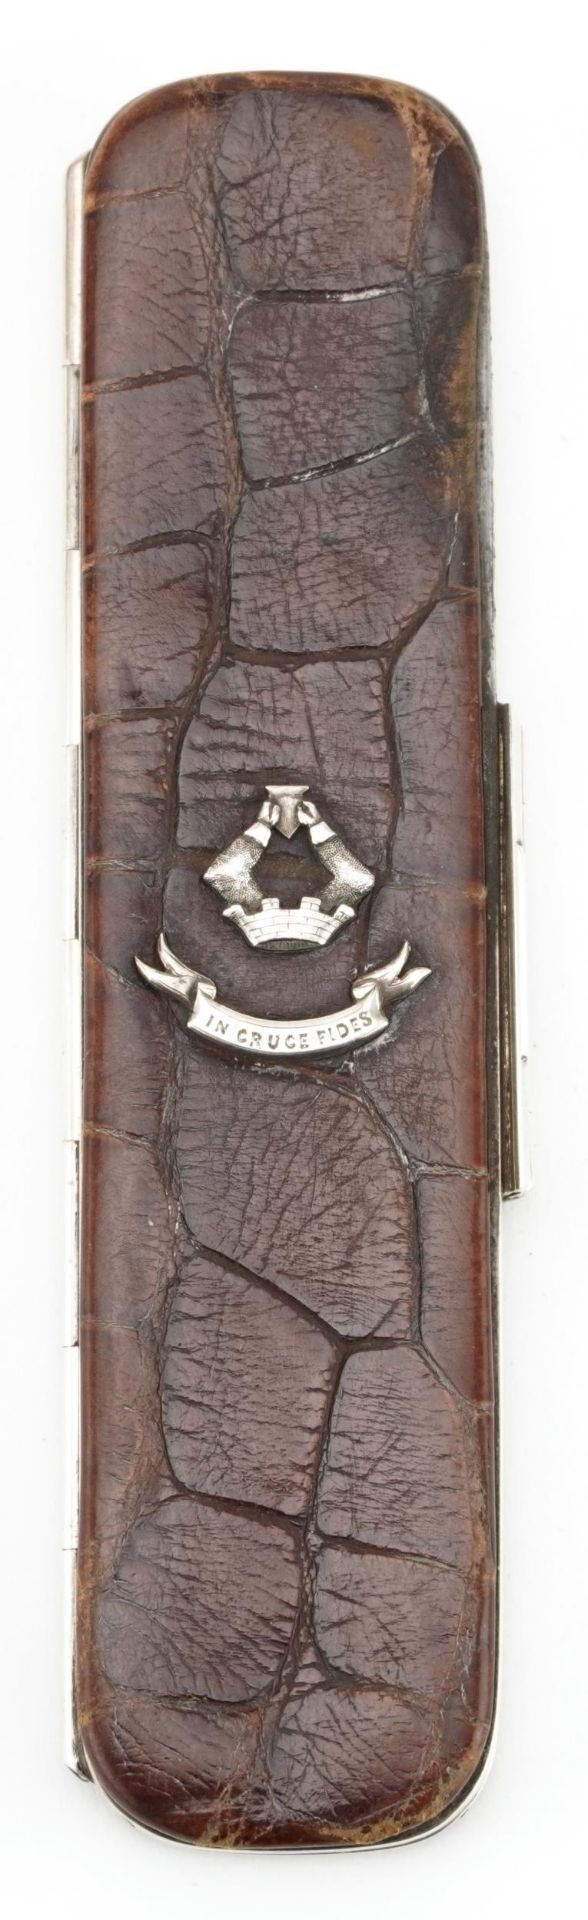 Early Victorian silver and crocodile pen case with coat of arms In Crugefides, William M Traies - Image 2 of 5